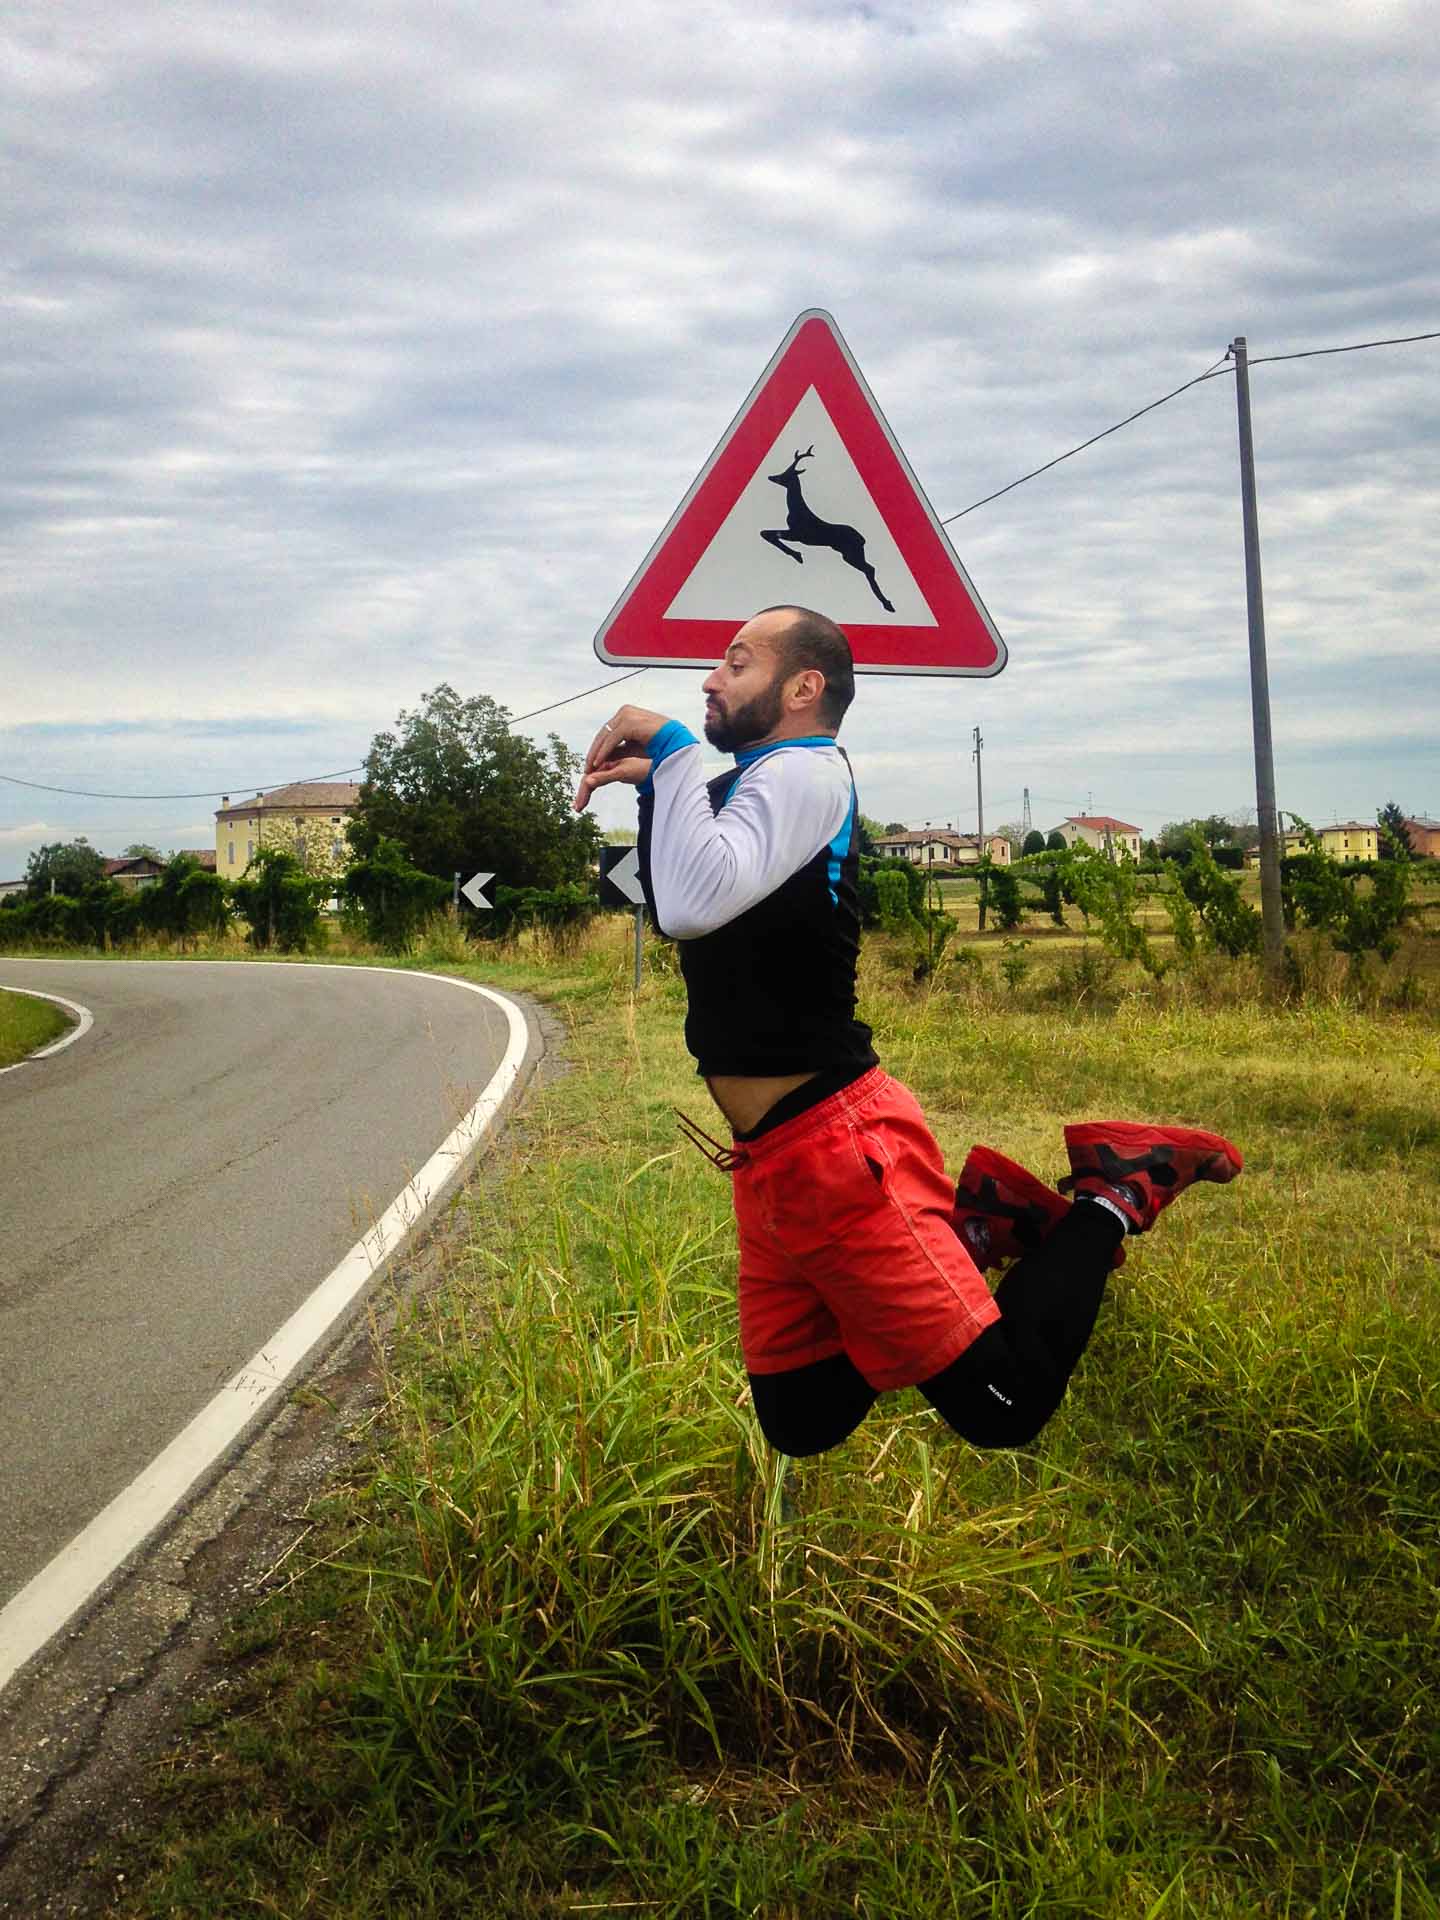 Tiago jumping like a deer in front of a road sign that shows a deer jumping